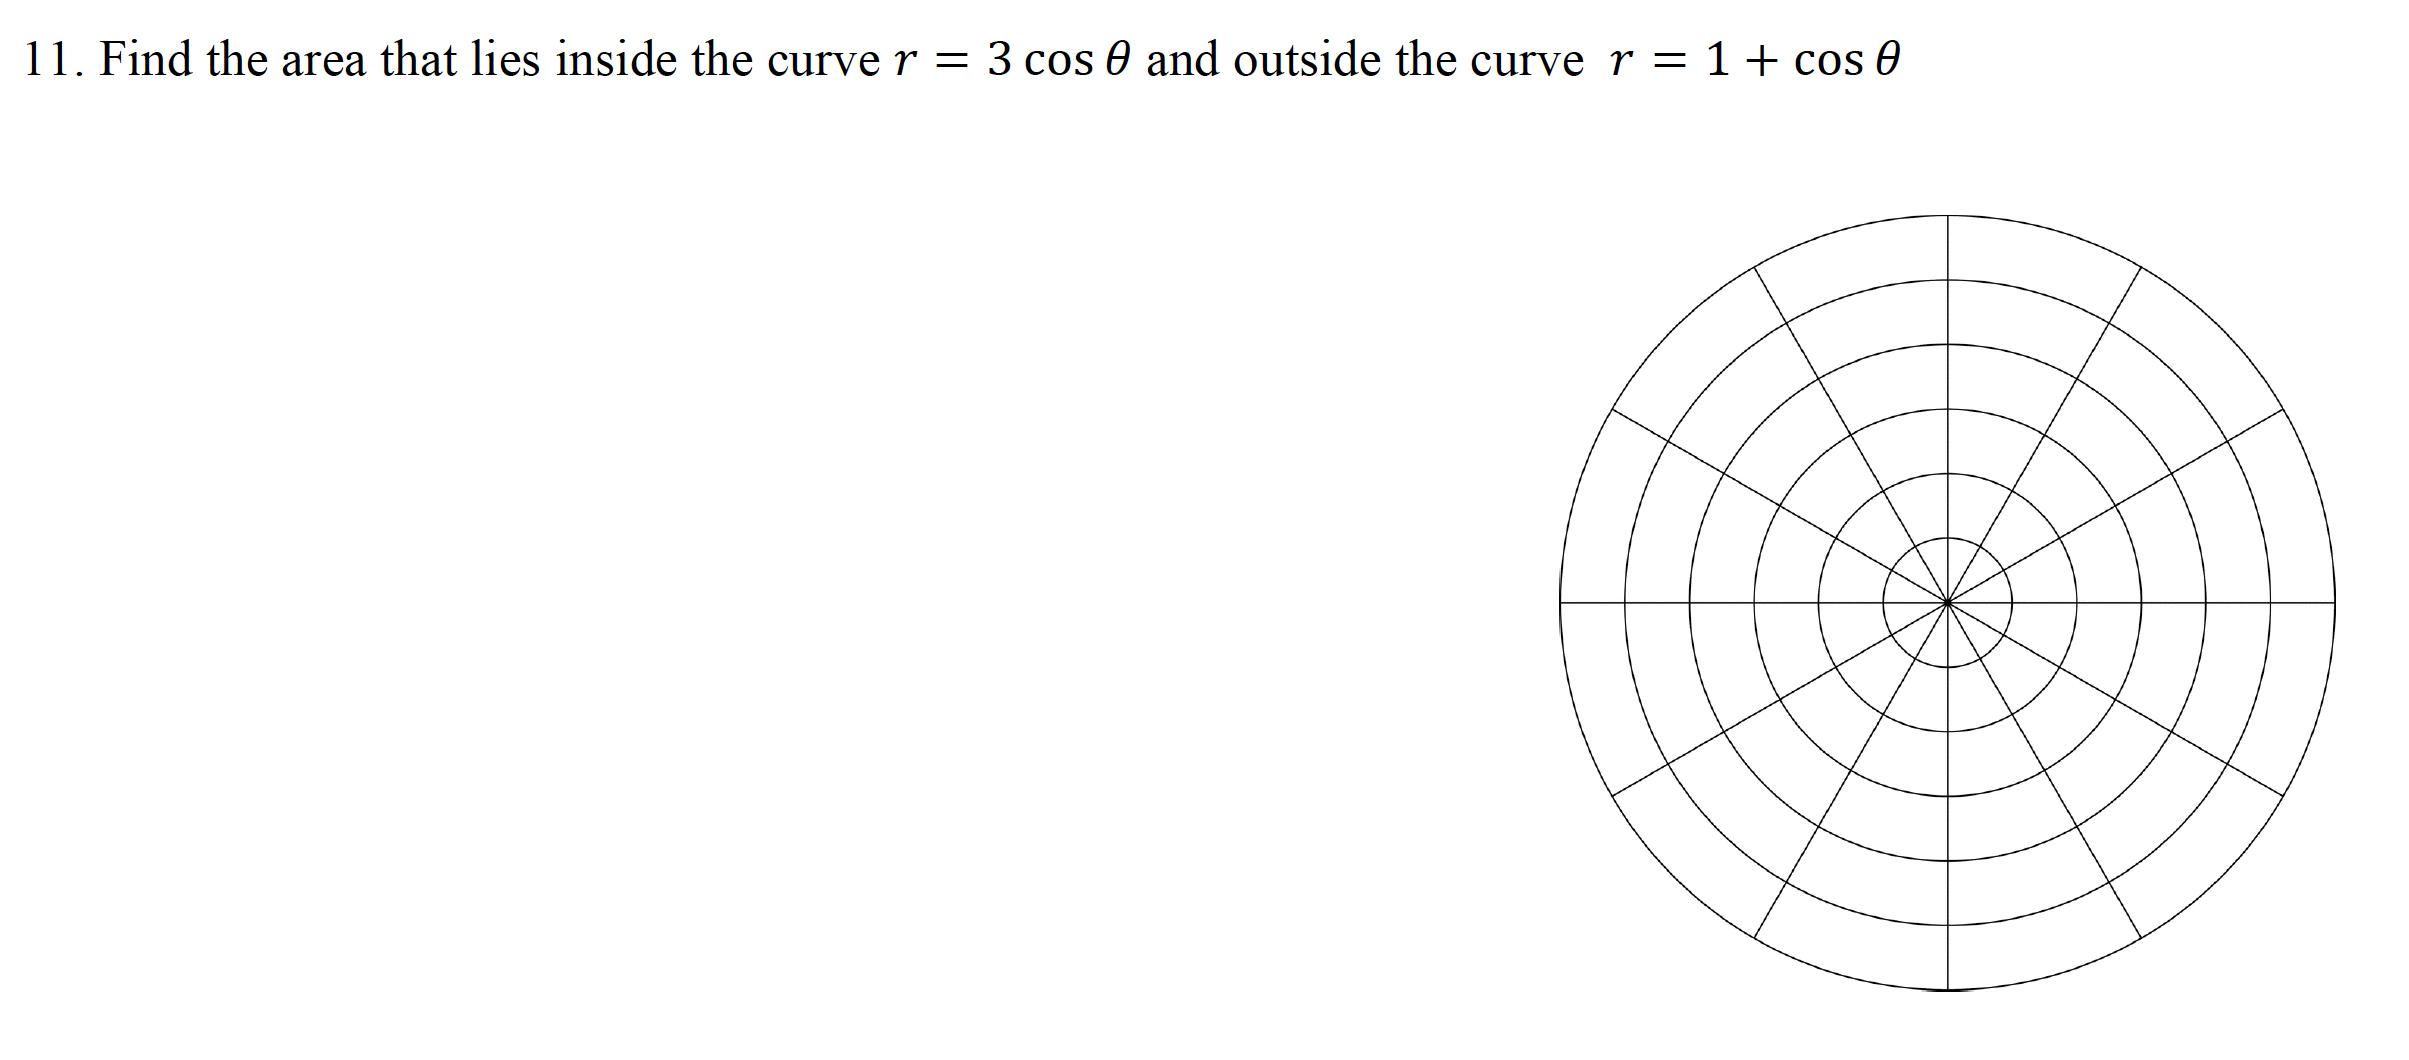 Find the area that lies inside the curver = 3 cos 0 and outside the curve r = 1+ cos 0
